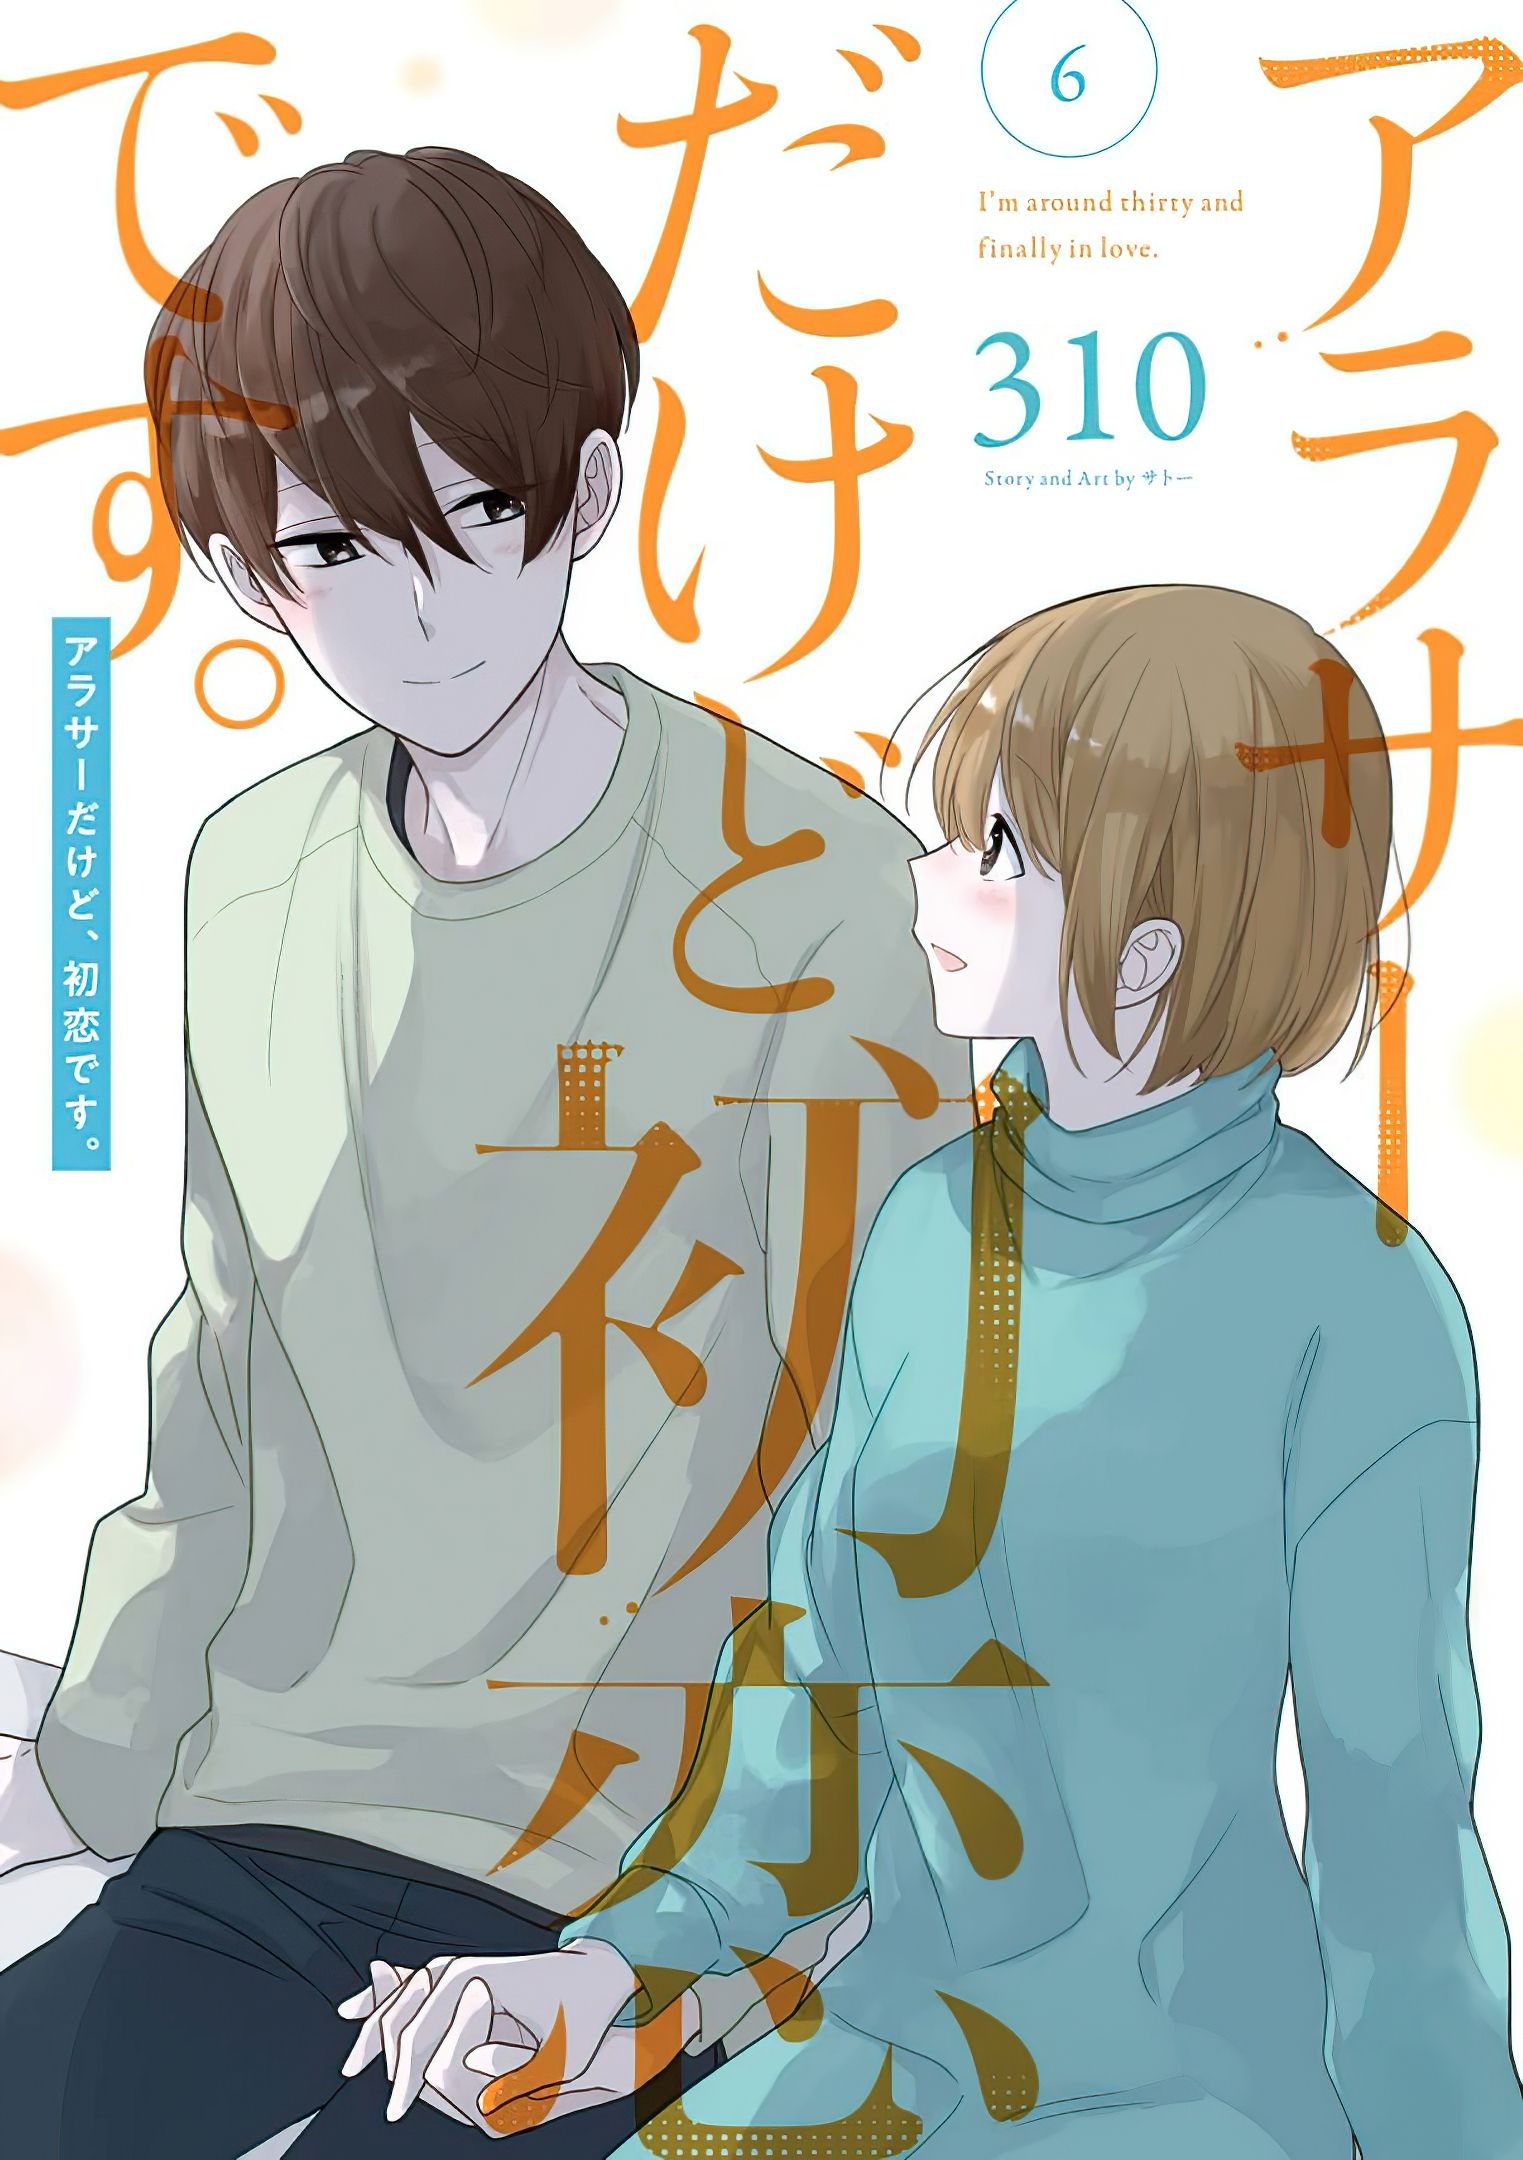 I'm Nearly 30, But This Is My First Love - chapter 52.5 - #1